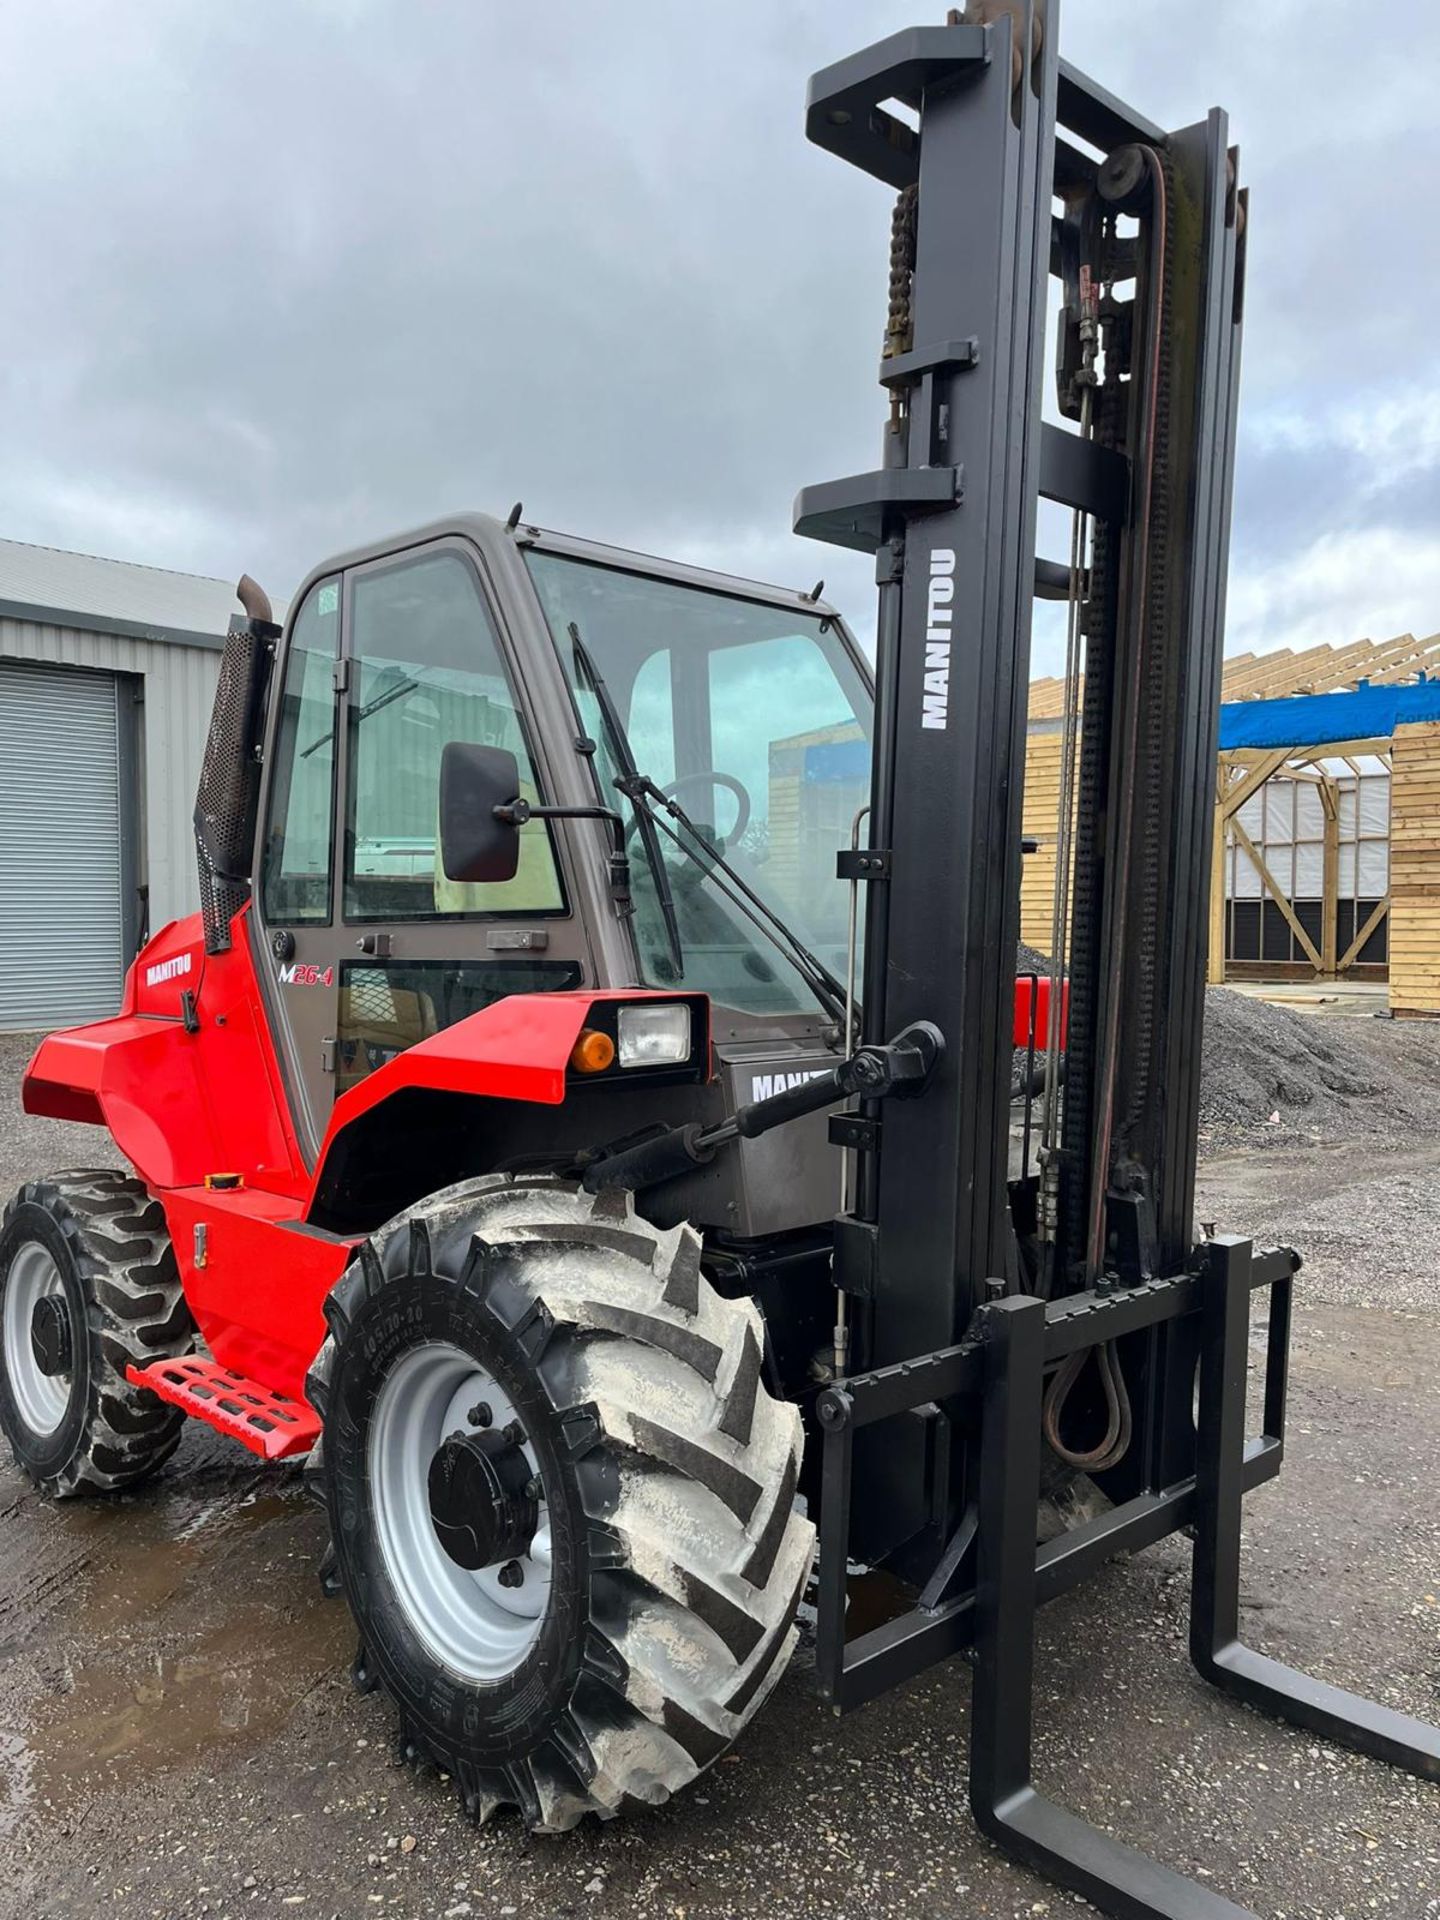 2017, MANITOU - M26, 2.6 Tonne (4WD) Forklift Truck - Image 5 of 6